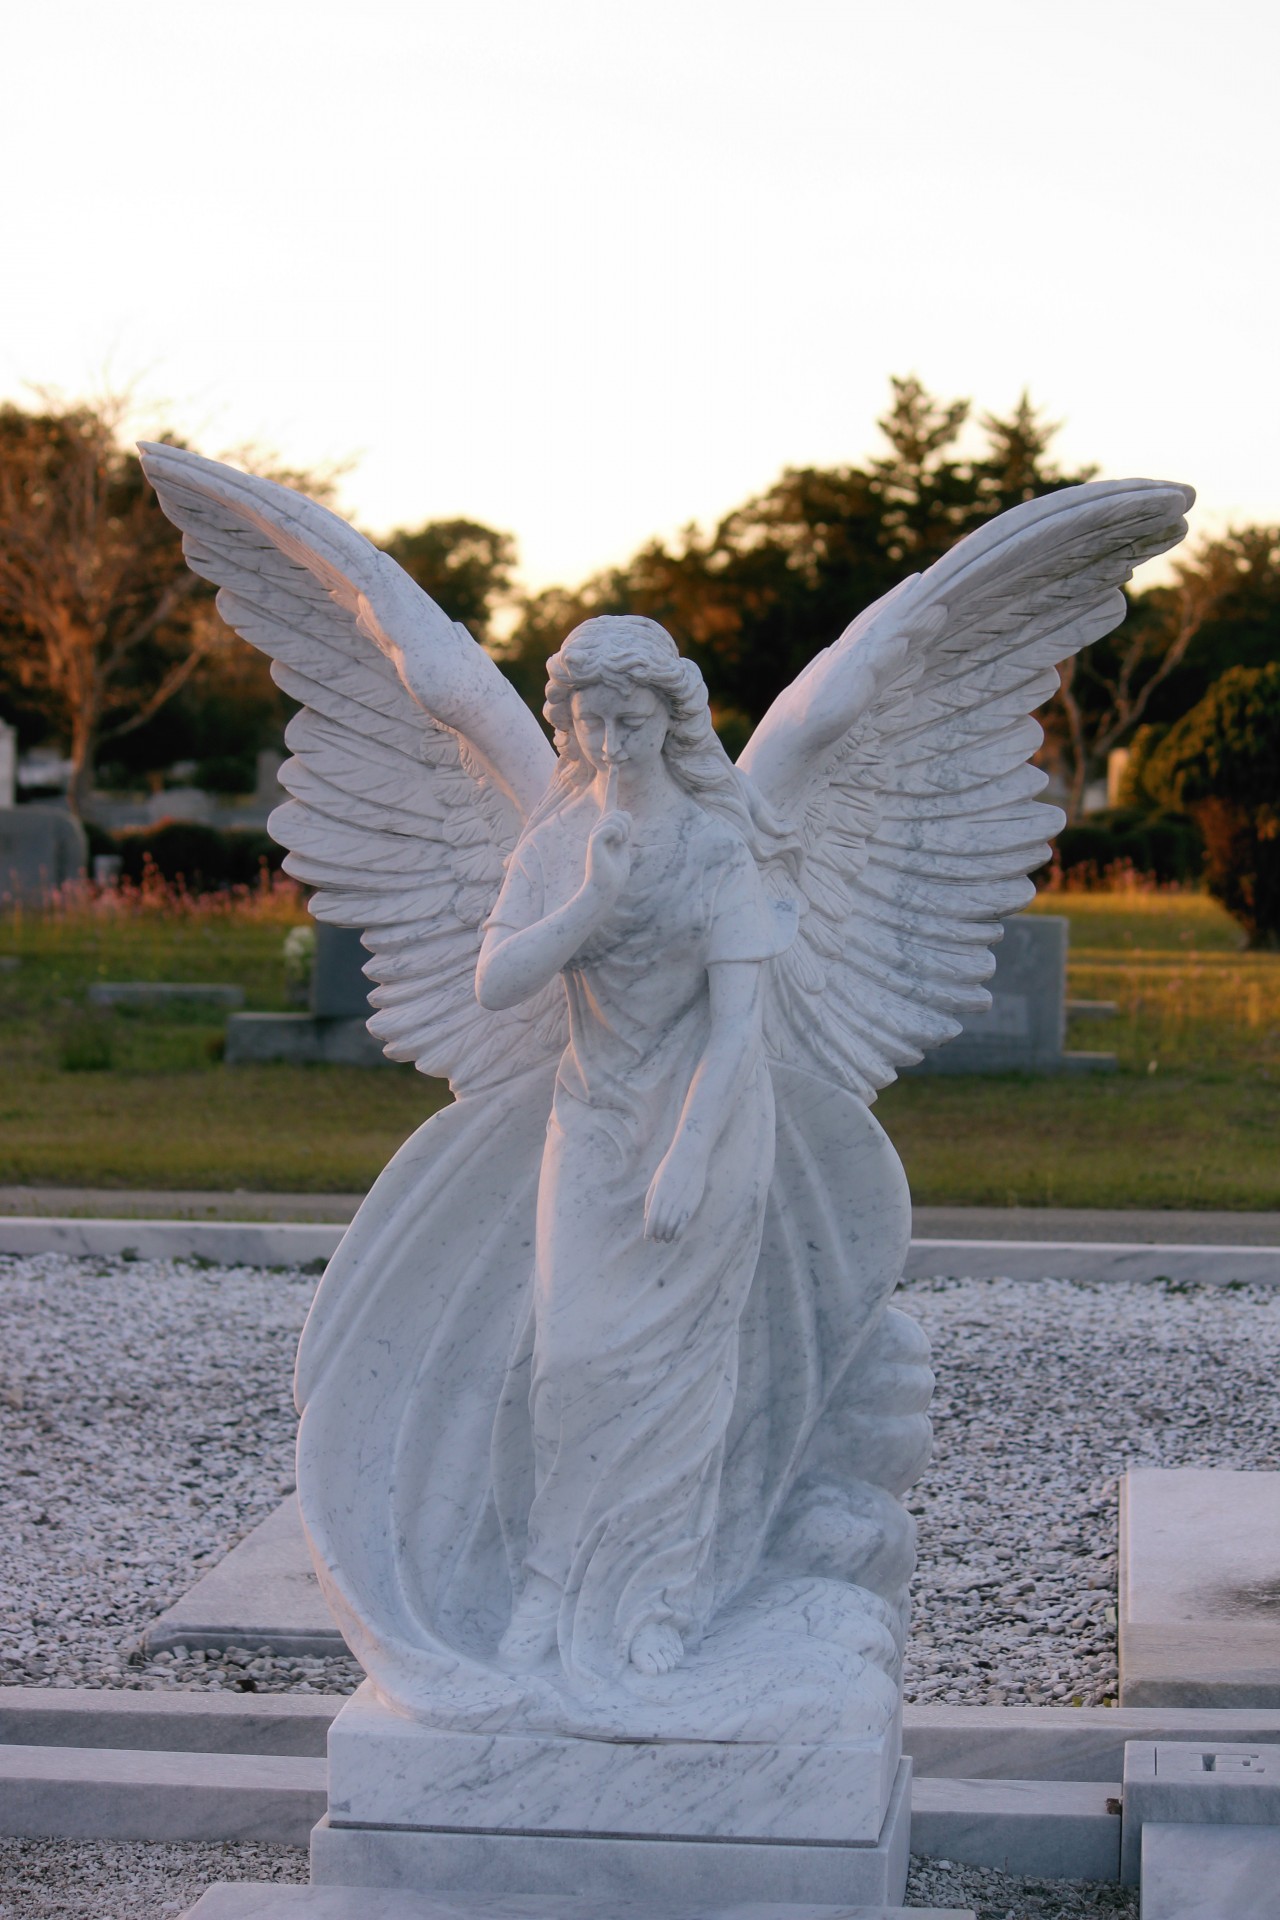 A angel statue with large wings at a cemetery watching over the graves.